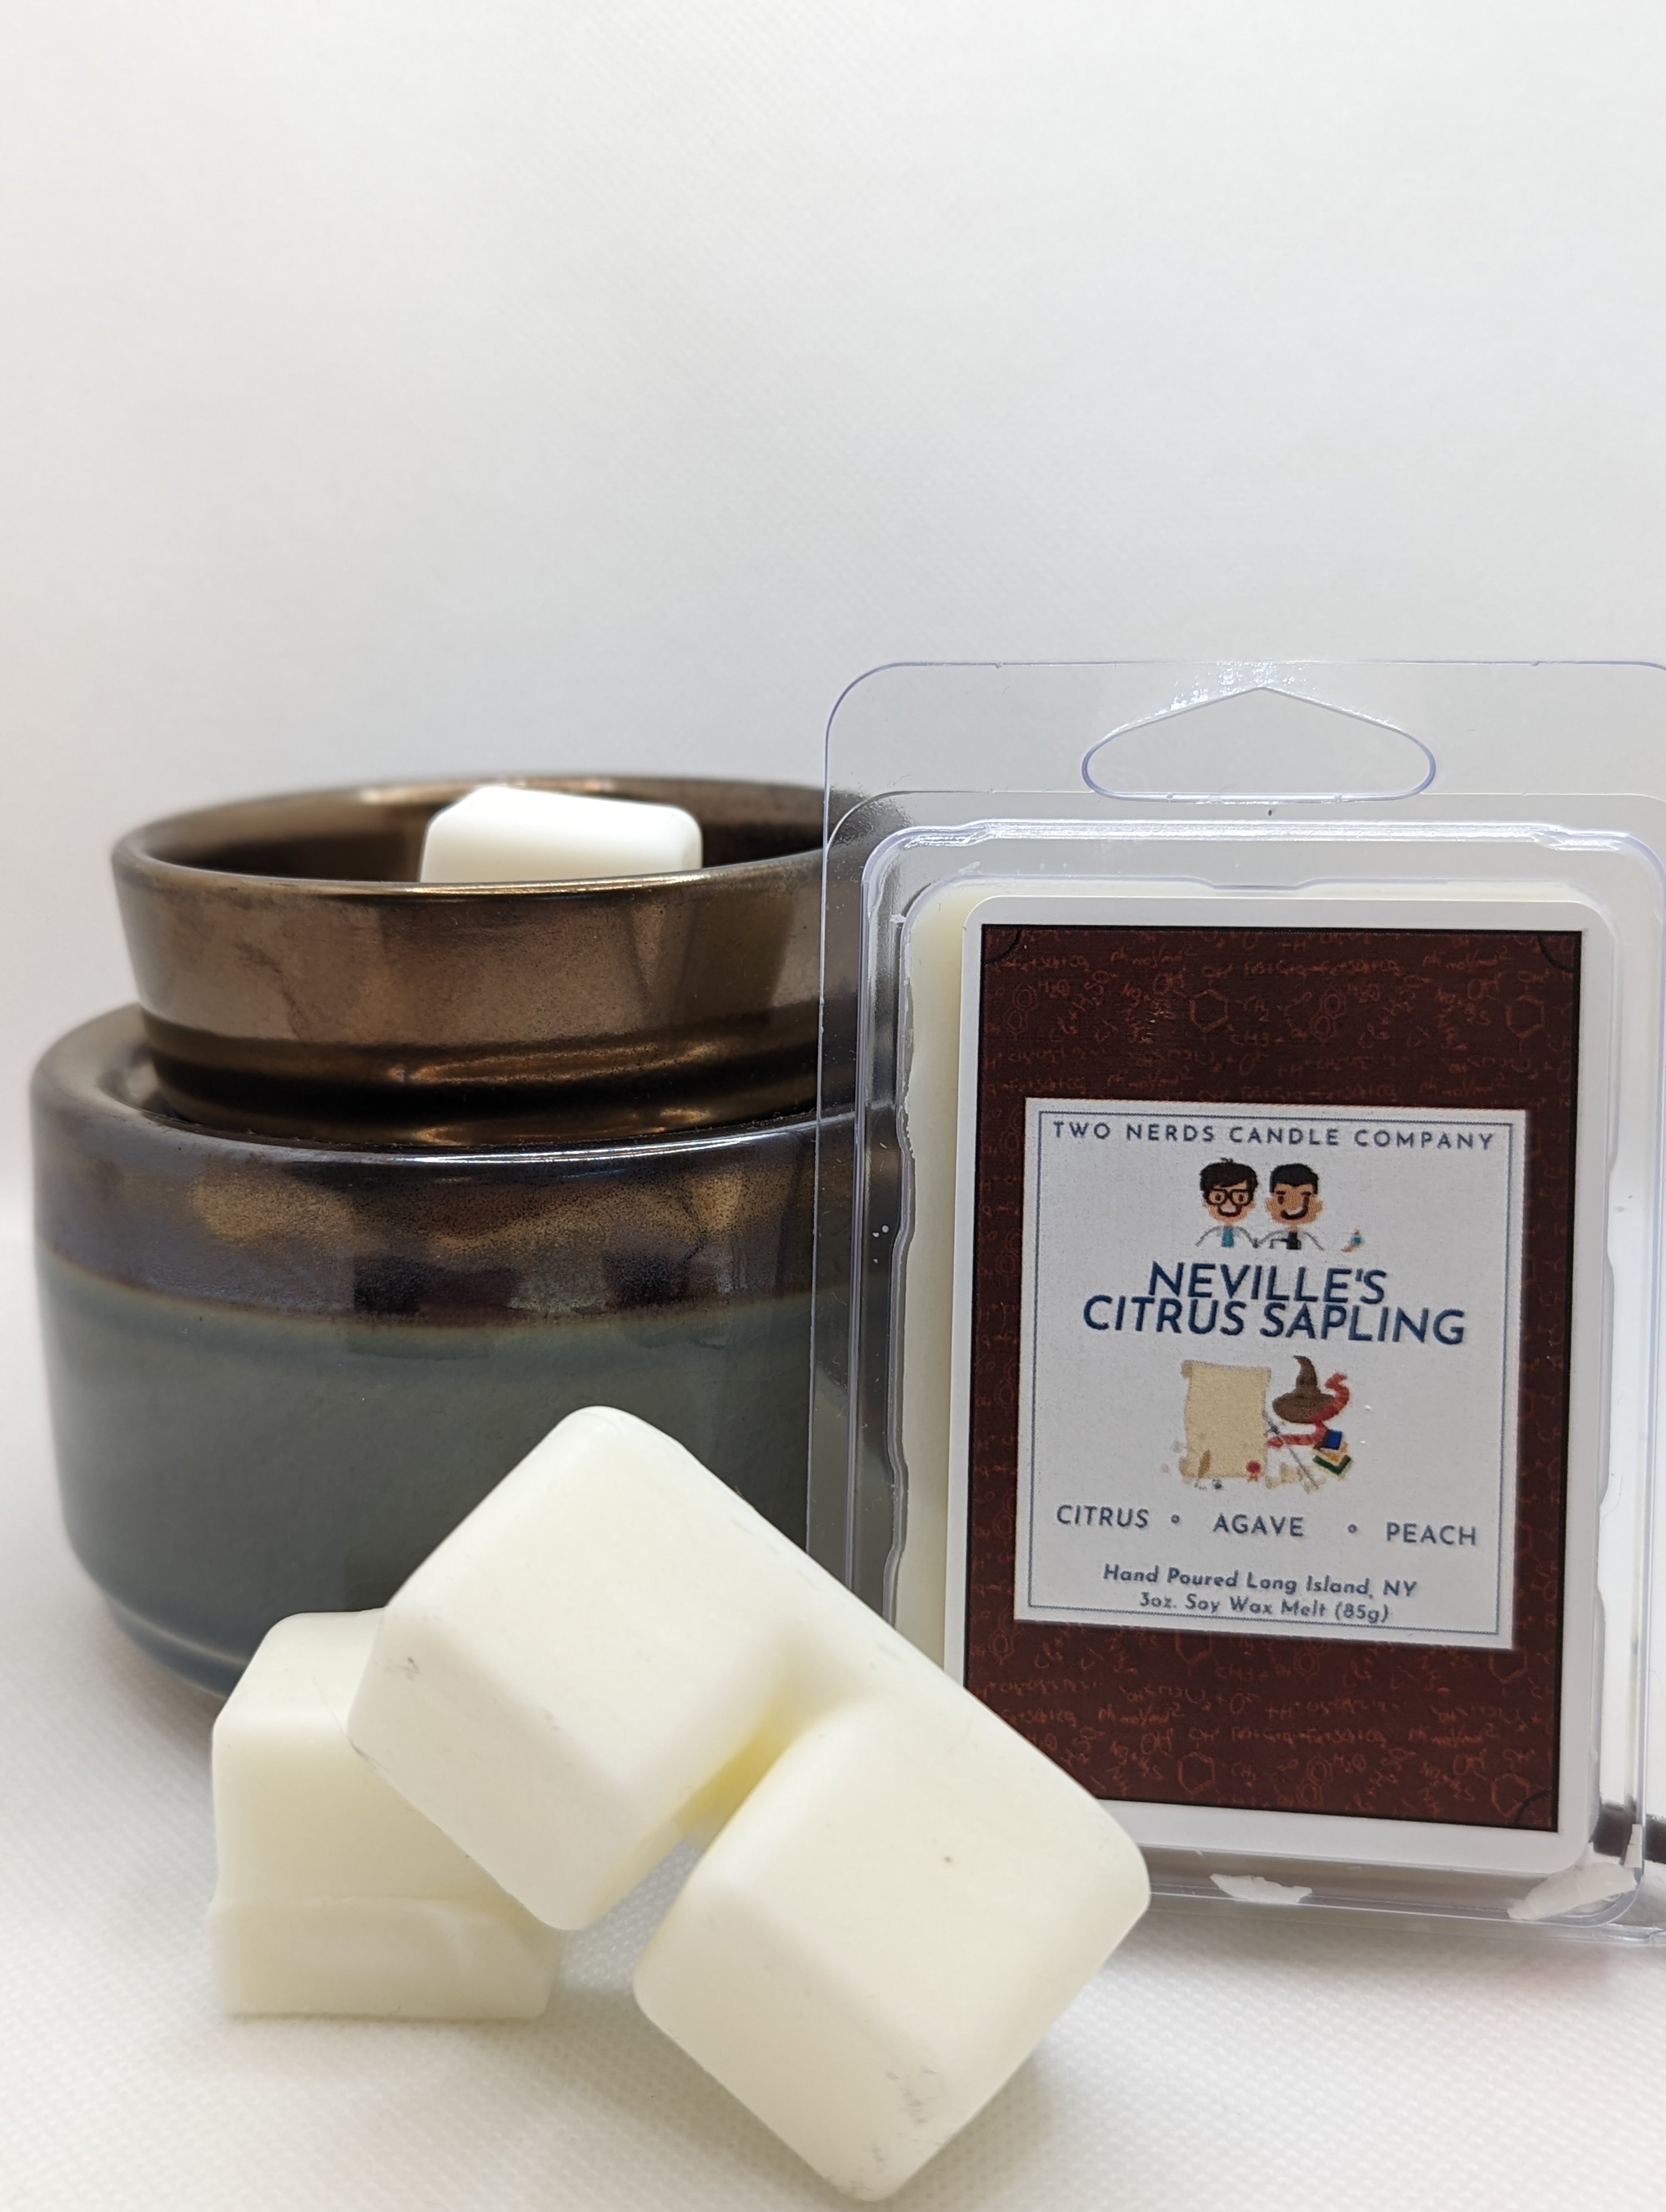 Two Nerds Candle Company Soy Wax Melts